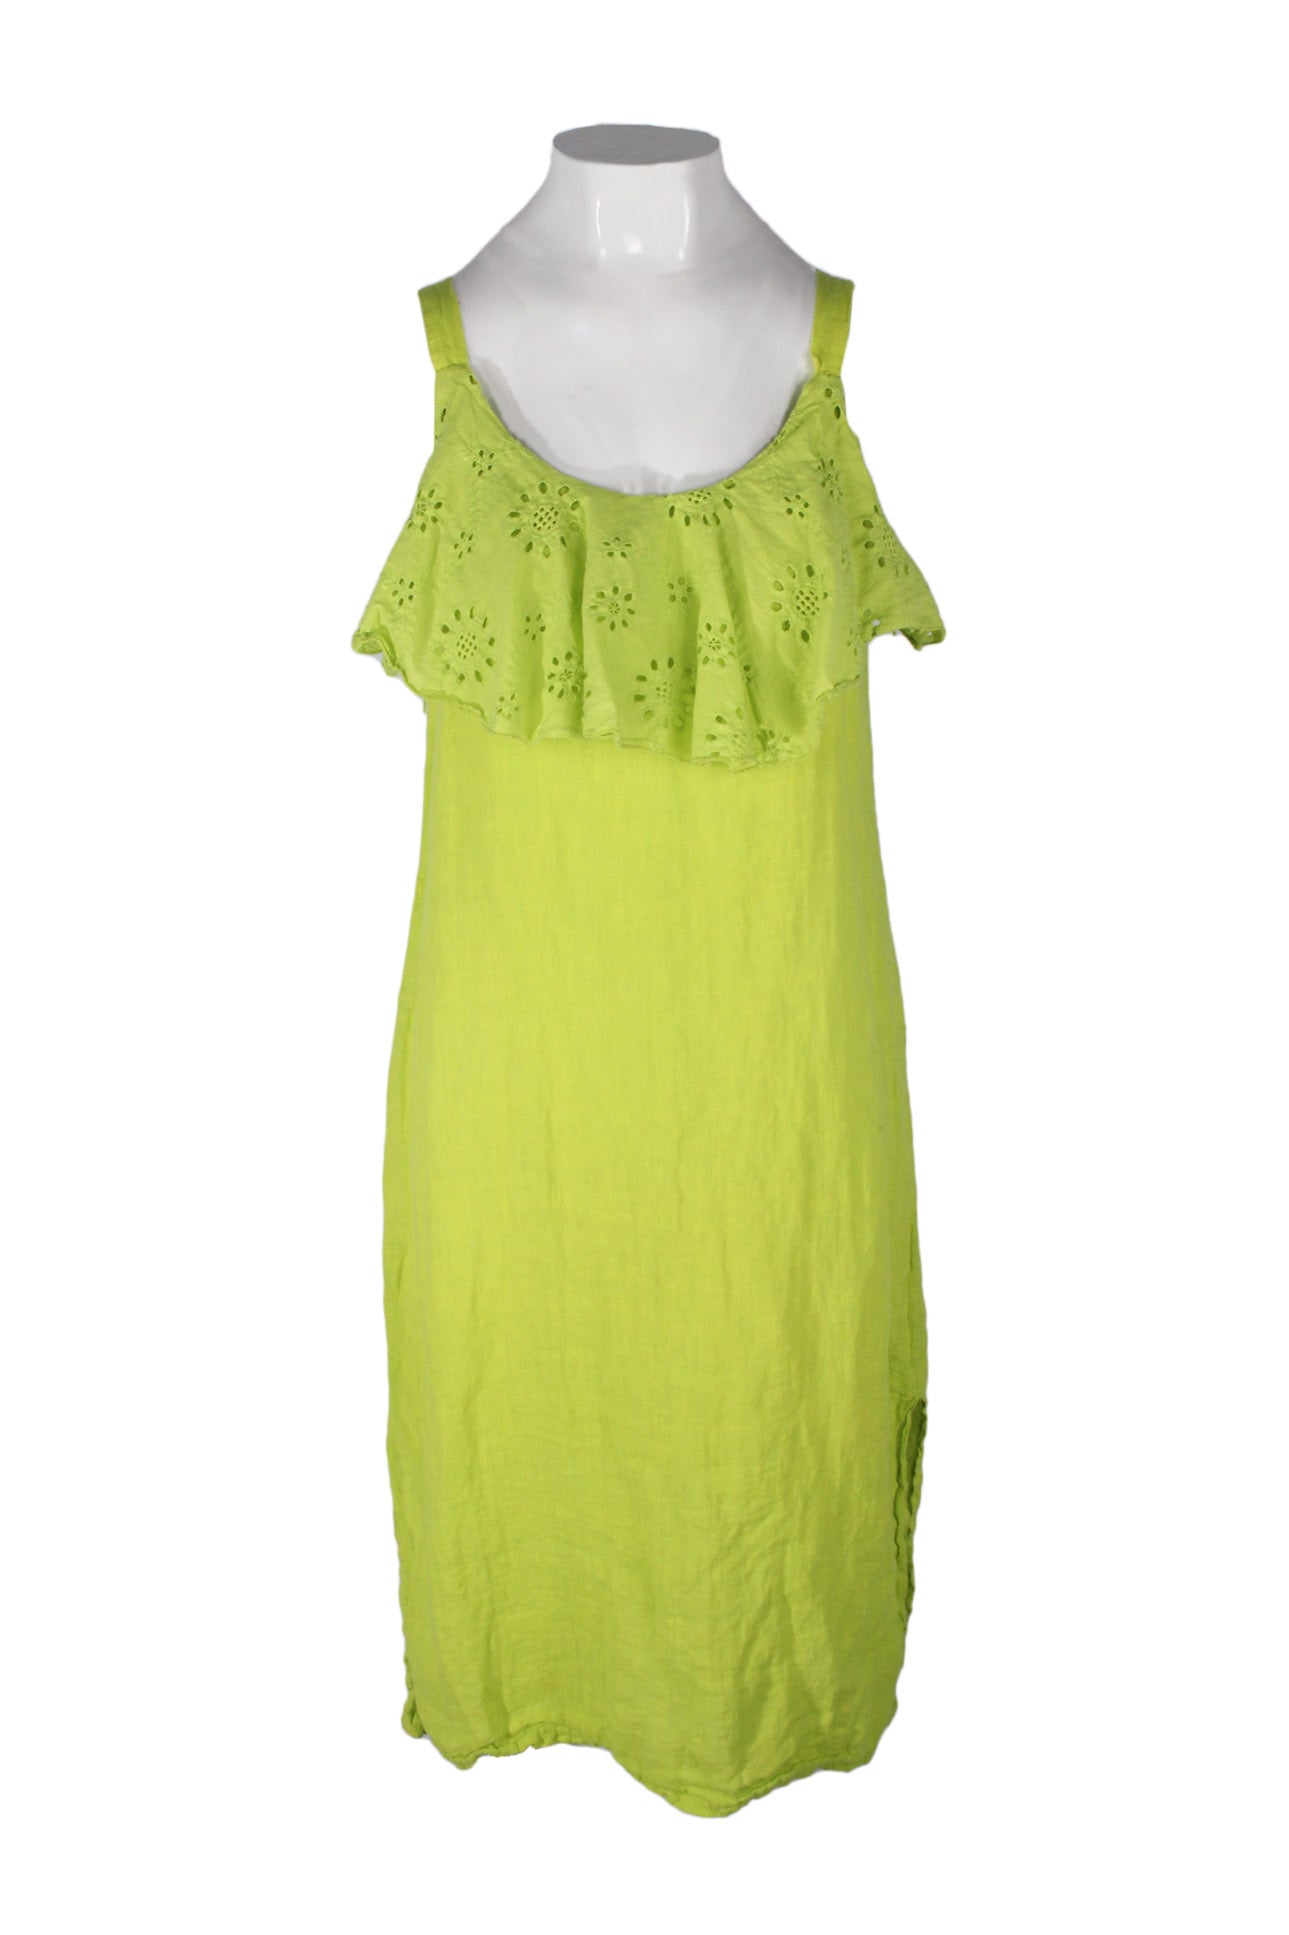 description: vintage valentina naldi green linen sleeveless dress. features eyelet floral ruffle at bust, loose fit, and slits on sides. 